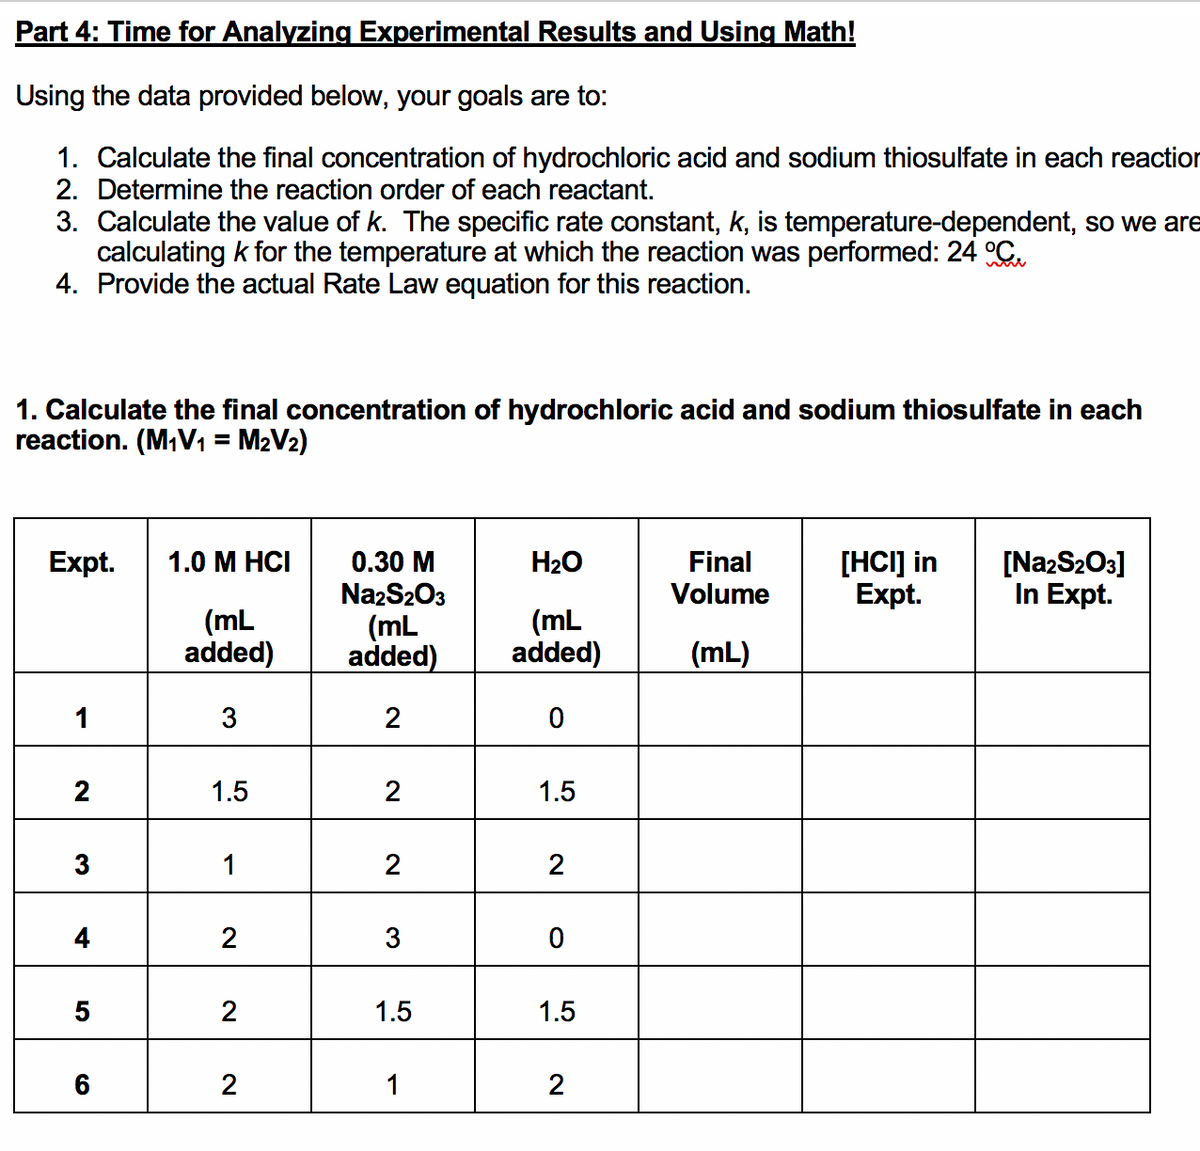 Part 4: Time for Analyzing Experimental Results and Using Math!
Using the data provided below, your goals are to:
1. Calculate the final concentration of hydrochloric acid and sodium thiosulfate in each reaction
2. Determine the reaction order of each reactant.
3. Calculate the value of k. The specific rate constant, k, is temperature-dependent, so we are
calculating k for the temperature at which the reaction was performed: 24 C.
4. Provide the actual Rate Law equation for this reaction.
1. Calculate the final concentration of hydrochloric acid and sodium thiosulfate in each
reaction. (M:V1 = M2V2)
Final
Volume
[HCI] in
Expt.
Expt.
1.0 M HCI
0.30 M
H20
[NazS203]
In Expt.
(mL
added)
NazS203
(mL
added)
(mL
added)
(mL)
1
3
2
2
1.5
2
1.5
3
1
4
3
5
2
1.5
1.5
6
2
1
2
